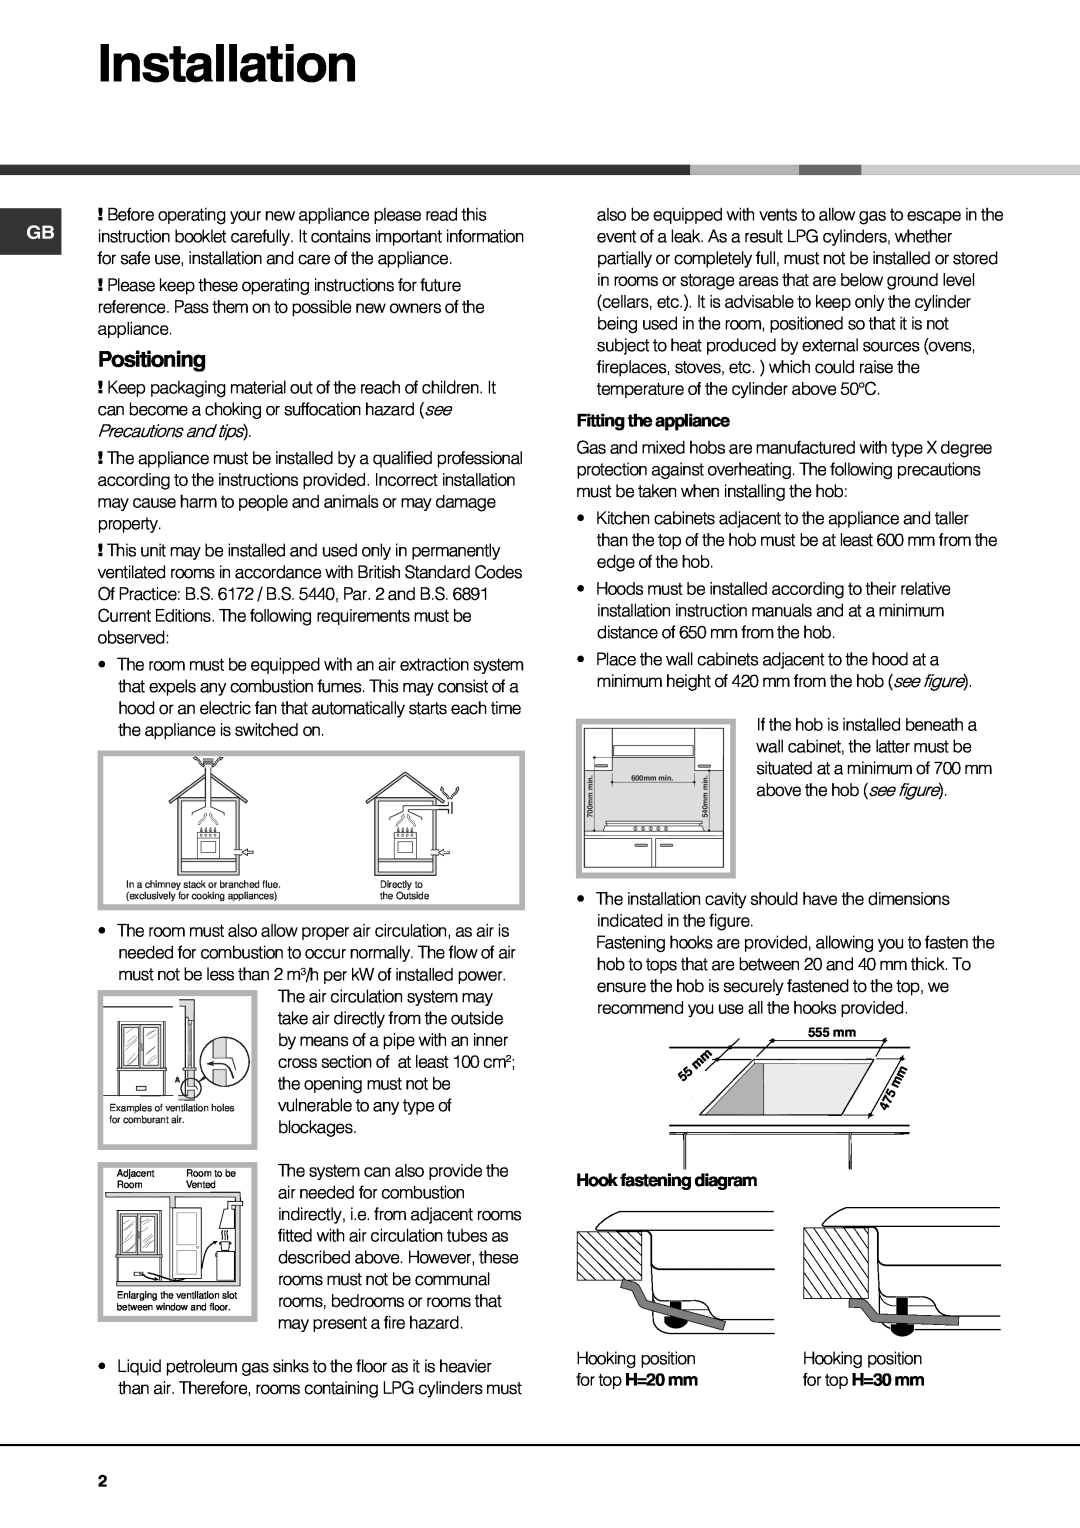 Hotpoint GQ74ST, GQ74SI, GQ64SI, GQ64ST specifications Installation, Positioning 